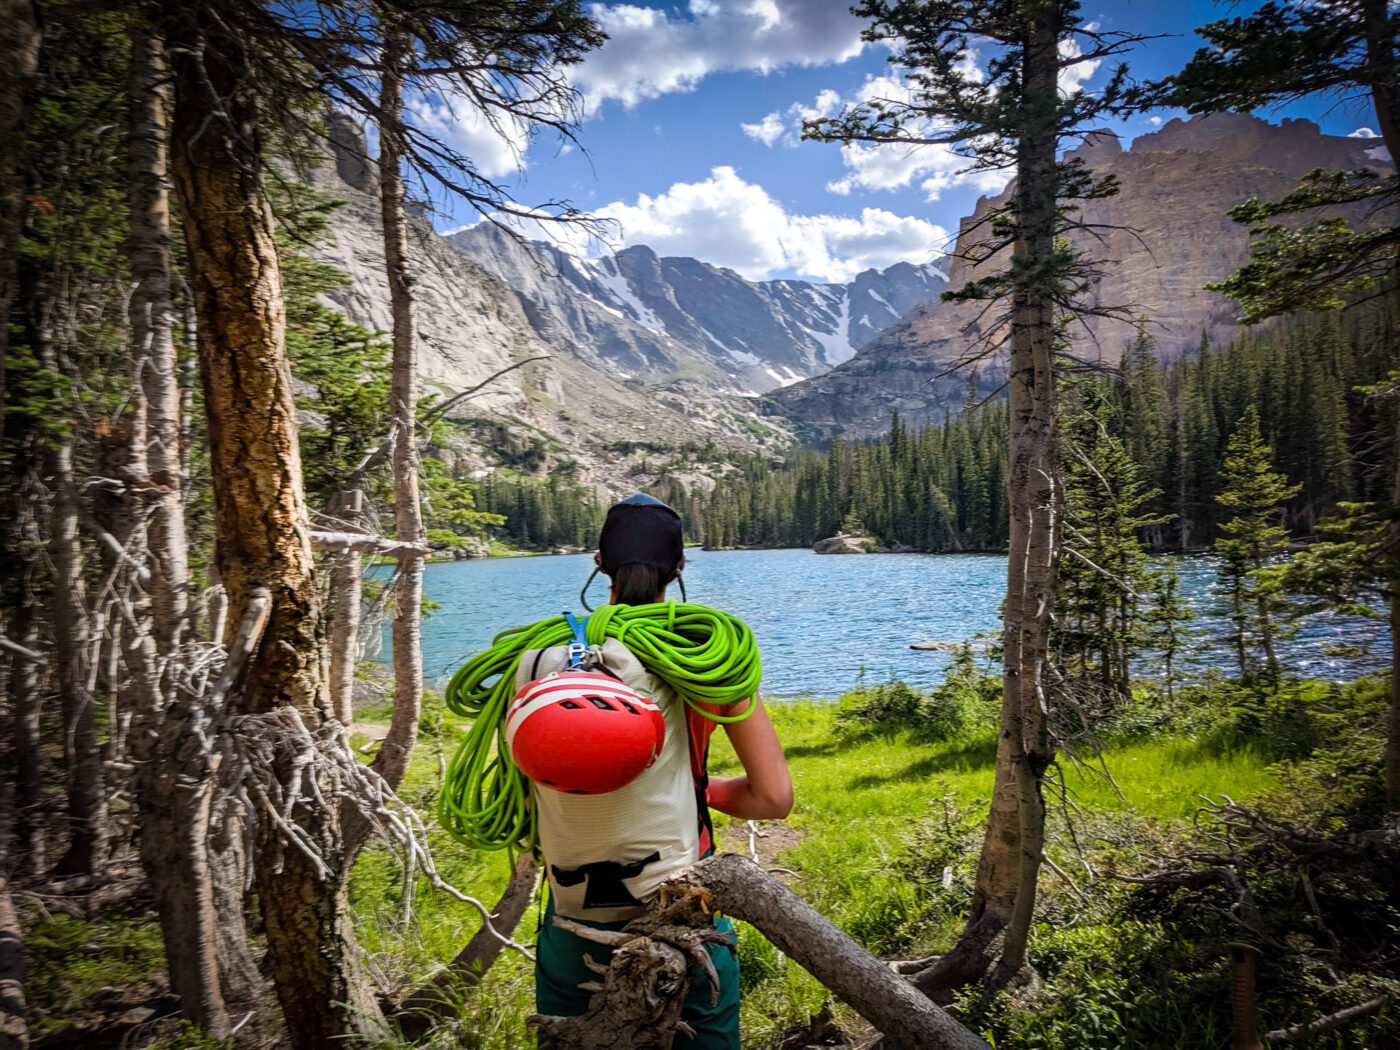 Meg is staring at an alpine lake in RMNP. She has a backpack on with green rope and a red helmet.